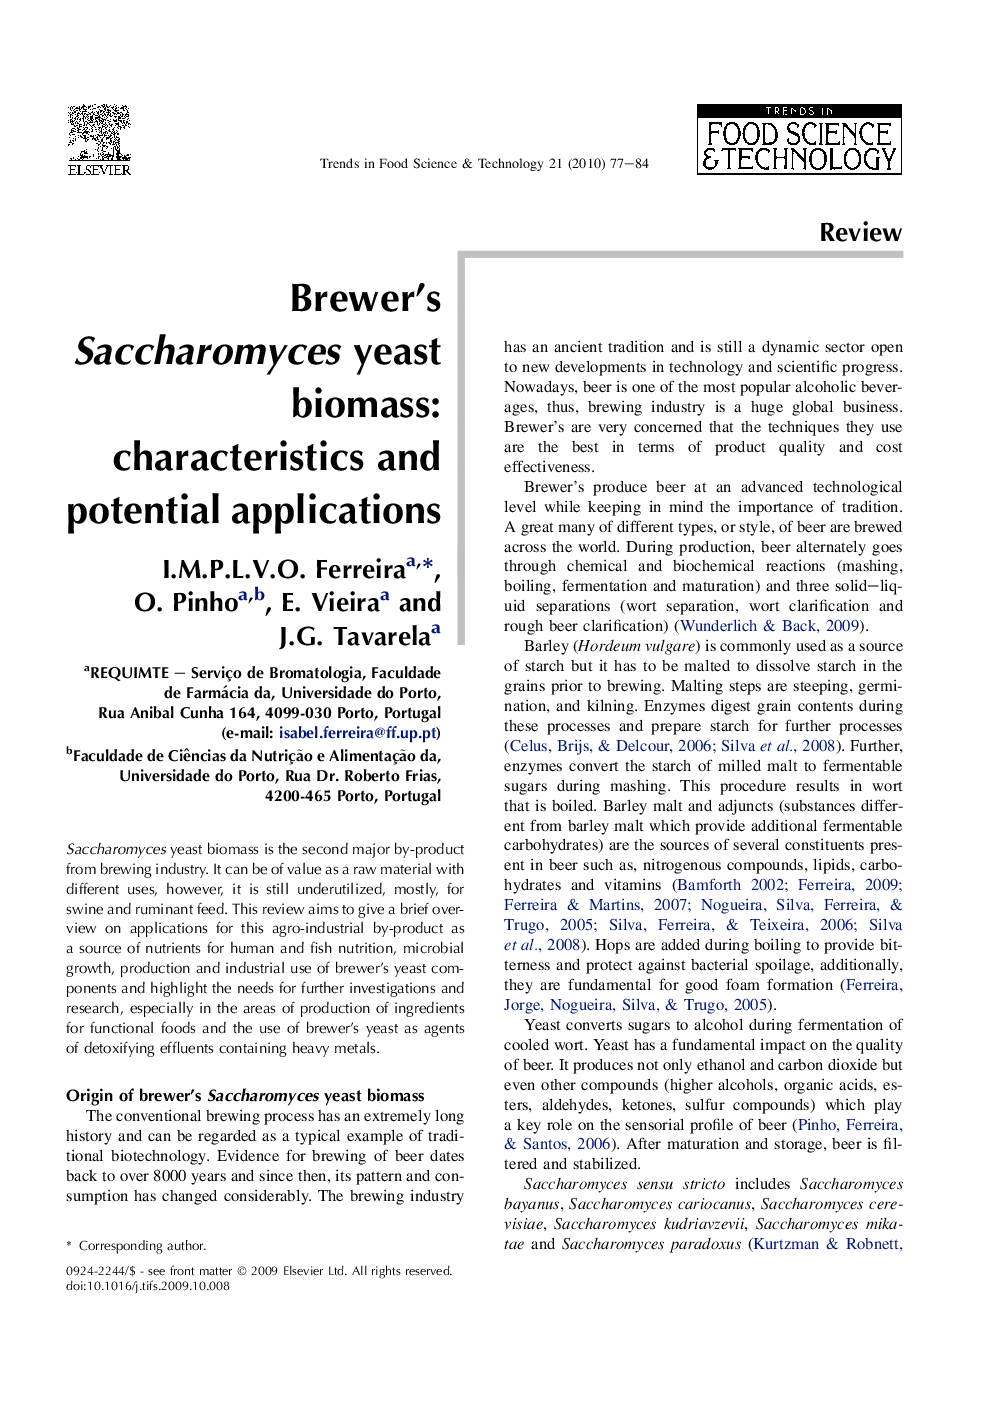 Brewer's Saccharomyces yeast biomass: characteristics and potential applications